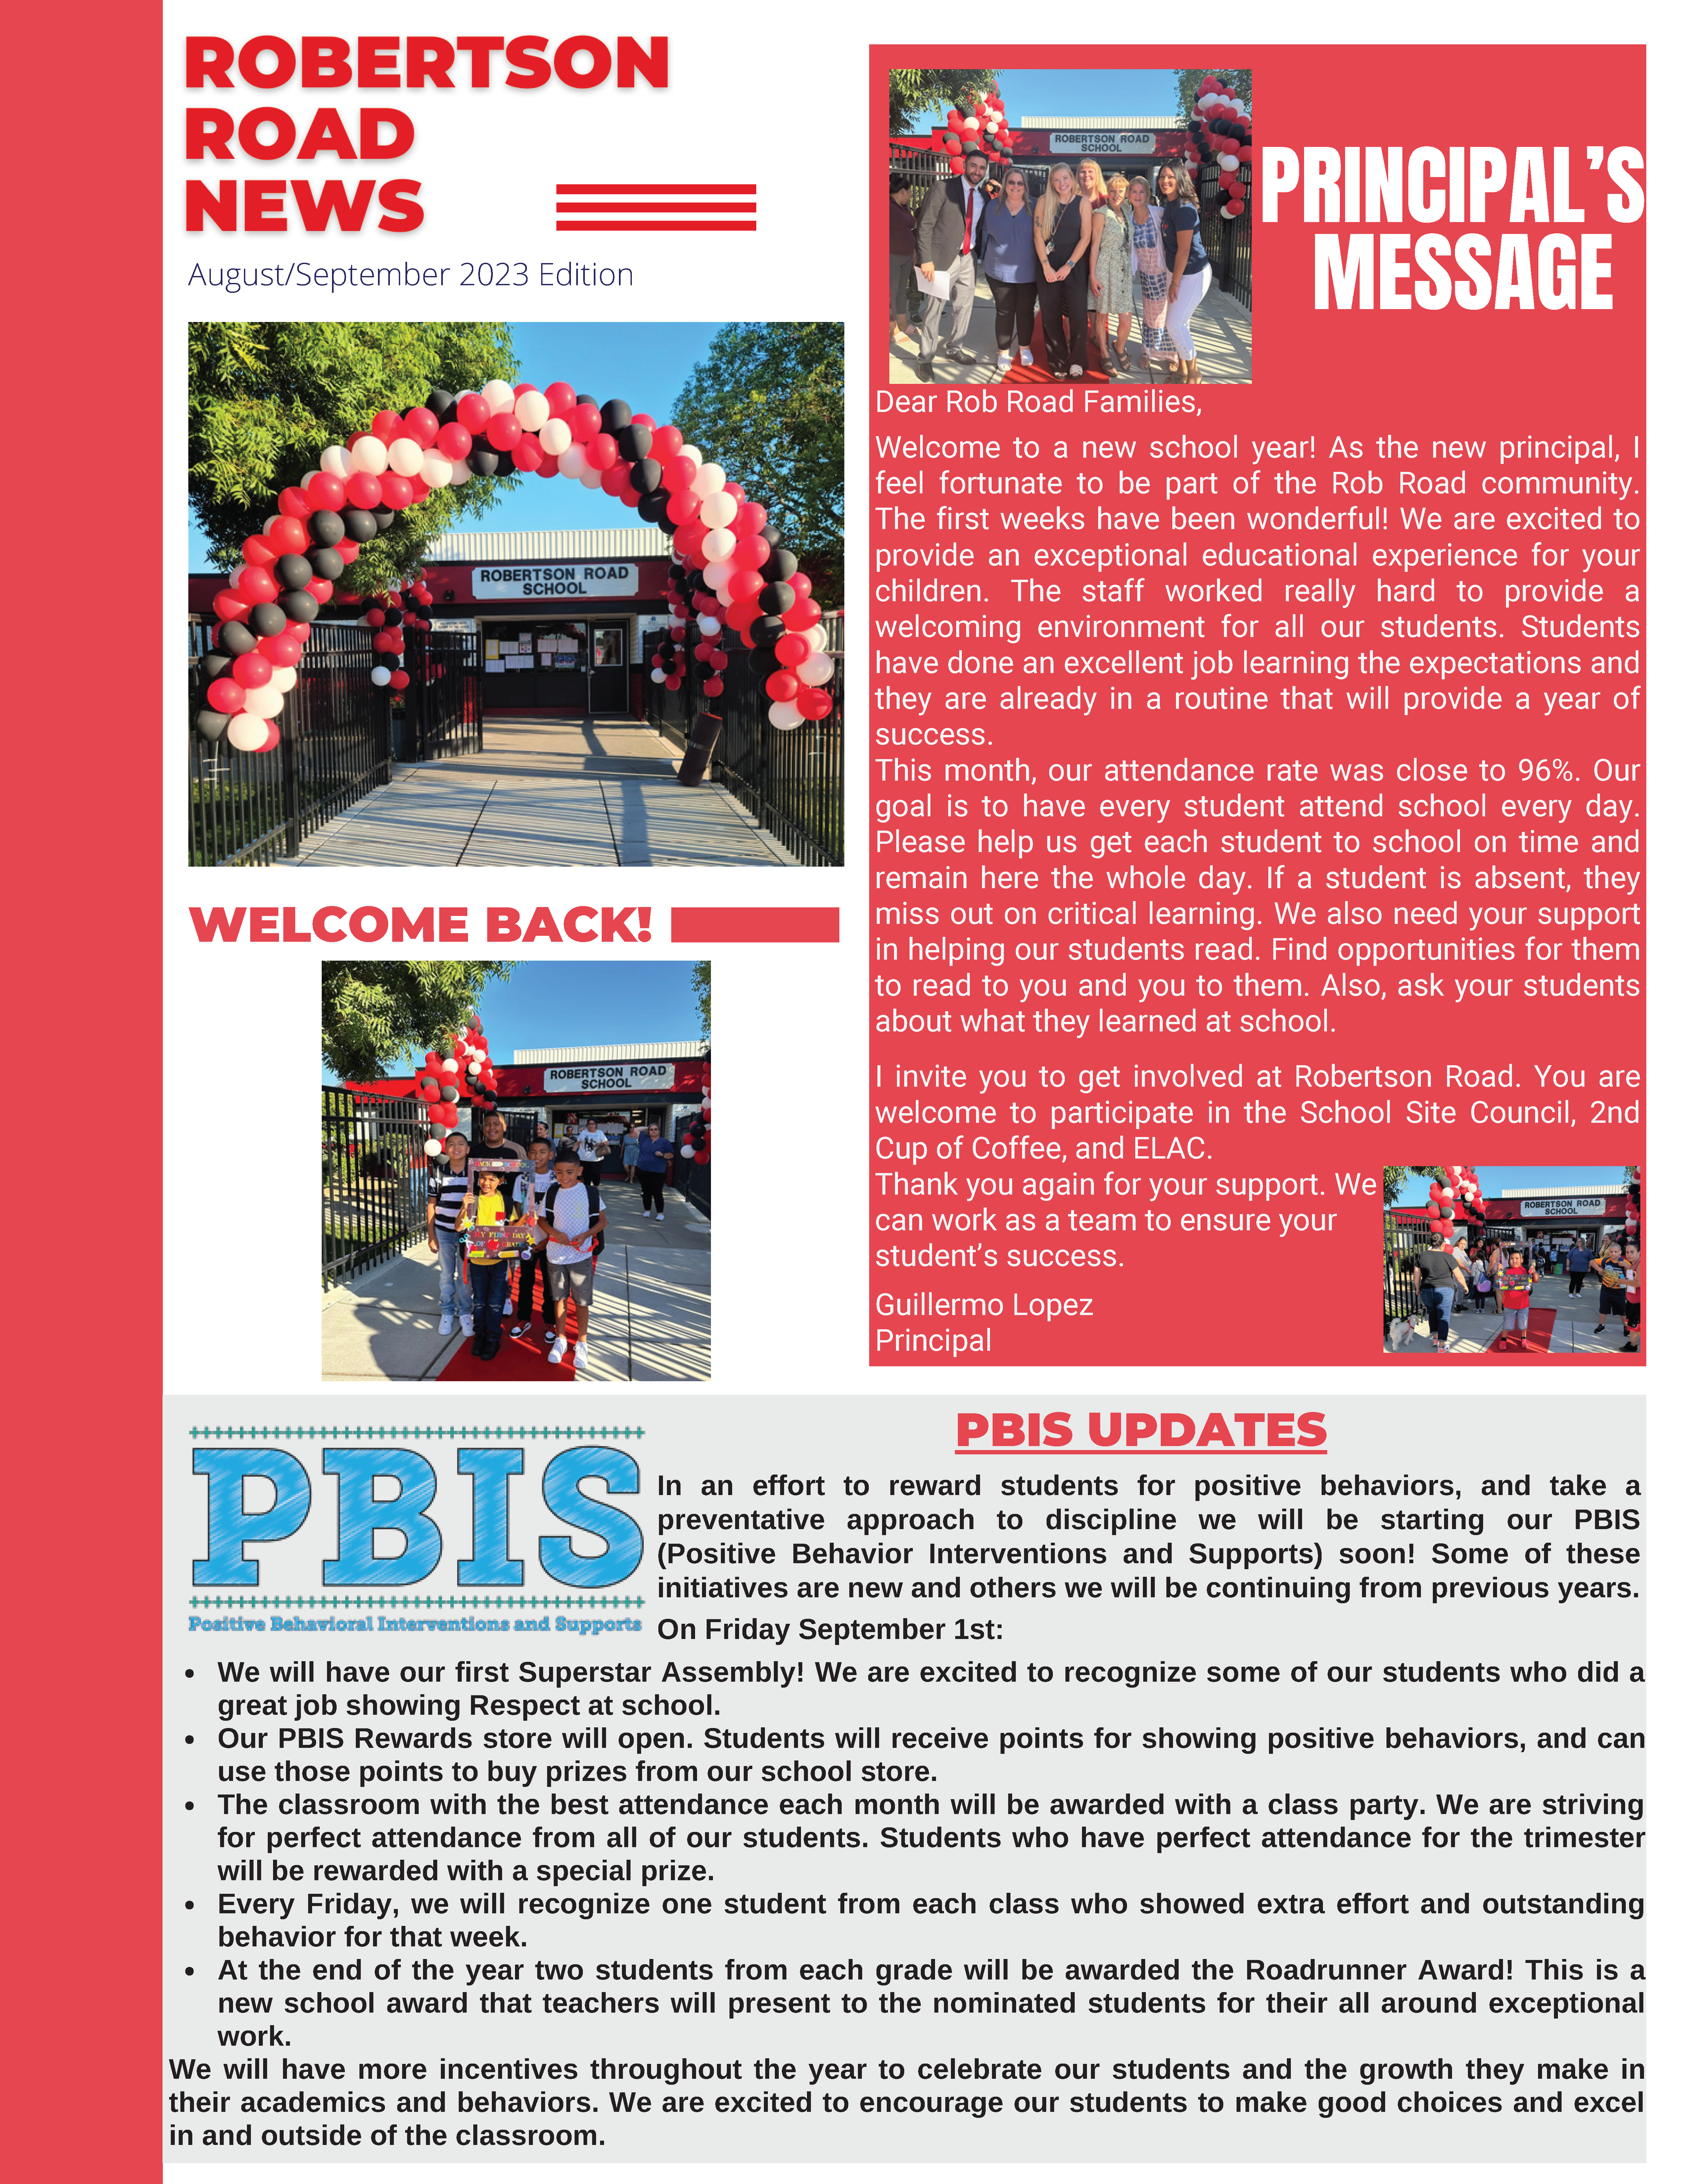 Robertson Road News - August/September 2023 Edition - Dear Rob Road Families, Welcome to a new school year! As the new principal, I feel fortunate to be part of the Rob Road community. The first few weeks have been wonderful! We are excited to provide an exceptional educational experience for your children. The staff worked really hard to provide a welcoming environment for all of our students. Students have done an excellent job learning the expectations and they are already in a routine that will provide a year of success. This month, our attendance rate was close to 96%. Our goal is to have every student attend school every day. Please help us get each student to school on time and remain here the whole day. If a student is absent, they miss out on critical learning. We also need your support in helping our students read. Find opportunities for them to read to you and you to them. Also ask your students about what they learned at school. I invite you to get involved at Robertson Road. You are welcome to participate in the School Site Council, 2nd Cup of Coffee, and ELAC. Thank you again for your support. We can work as a team to ensure your student's success. Guillermo Lopez, Principal. 